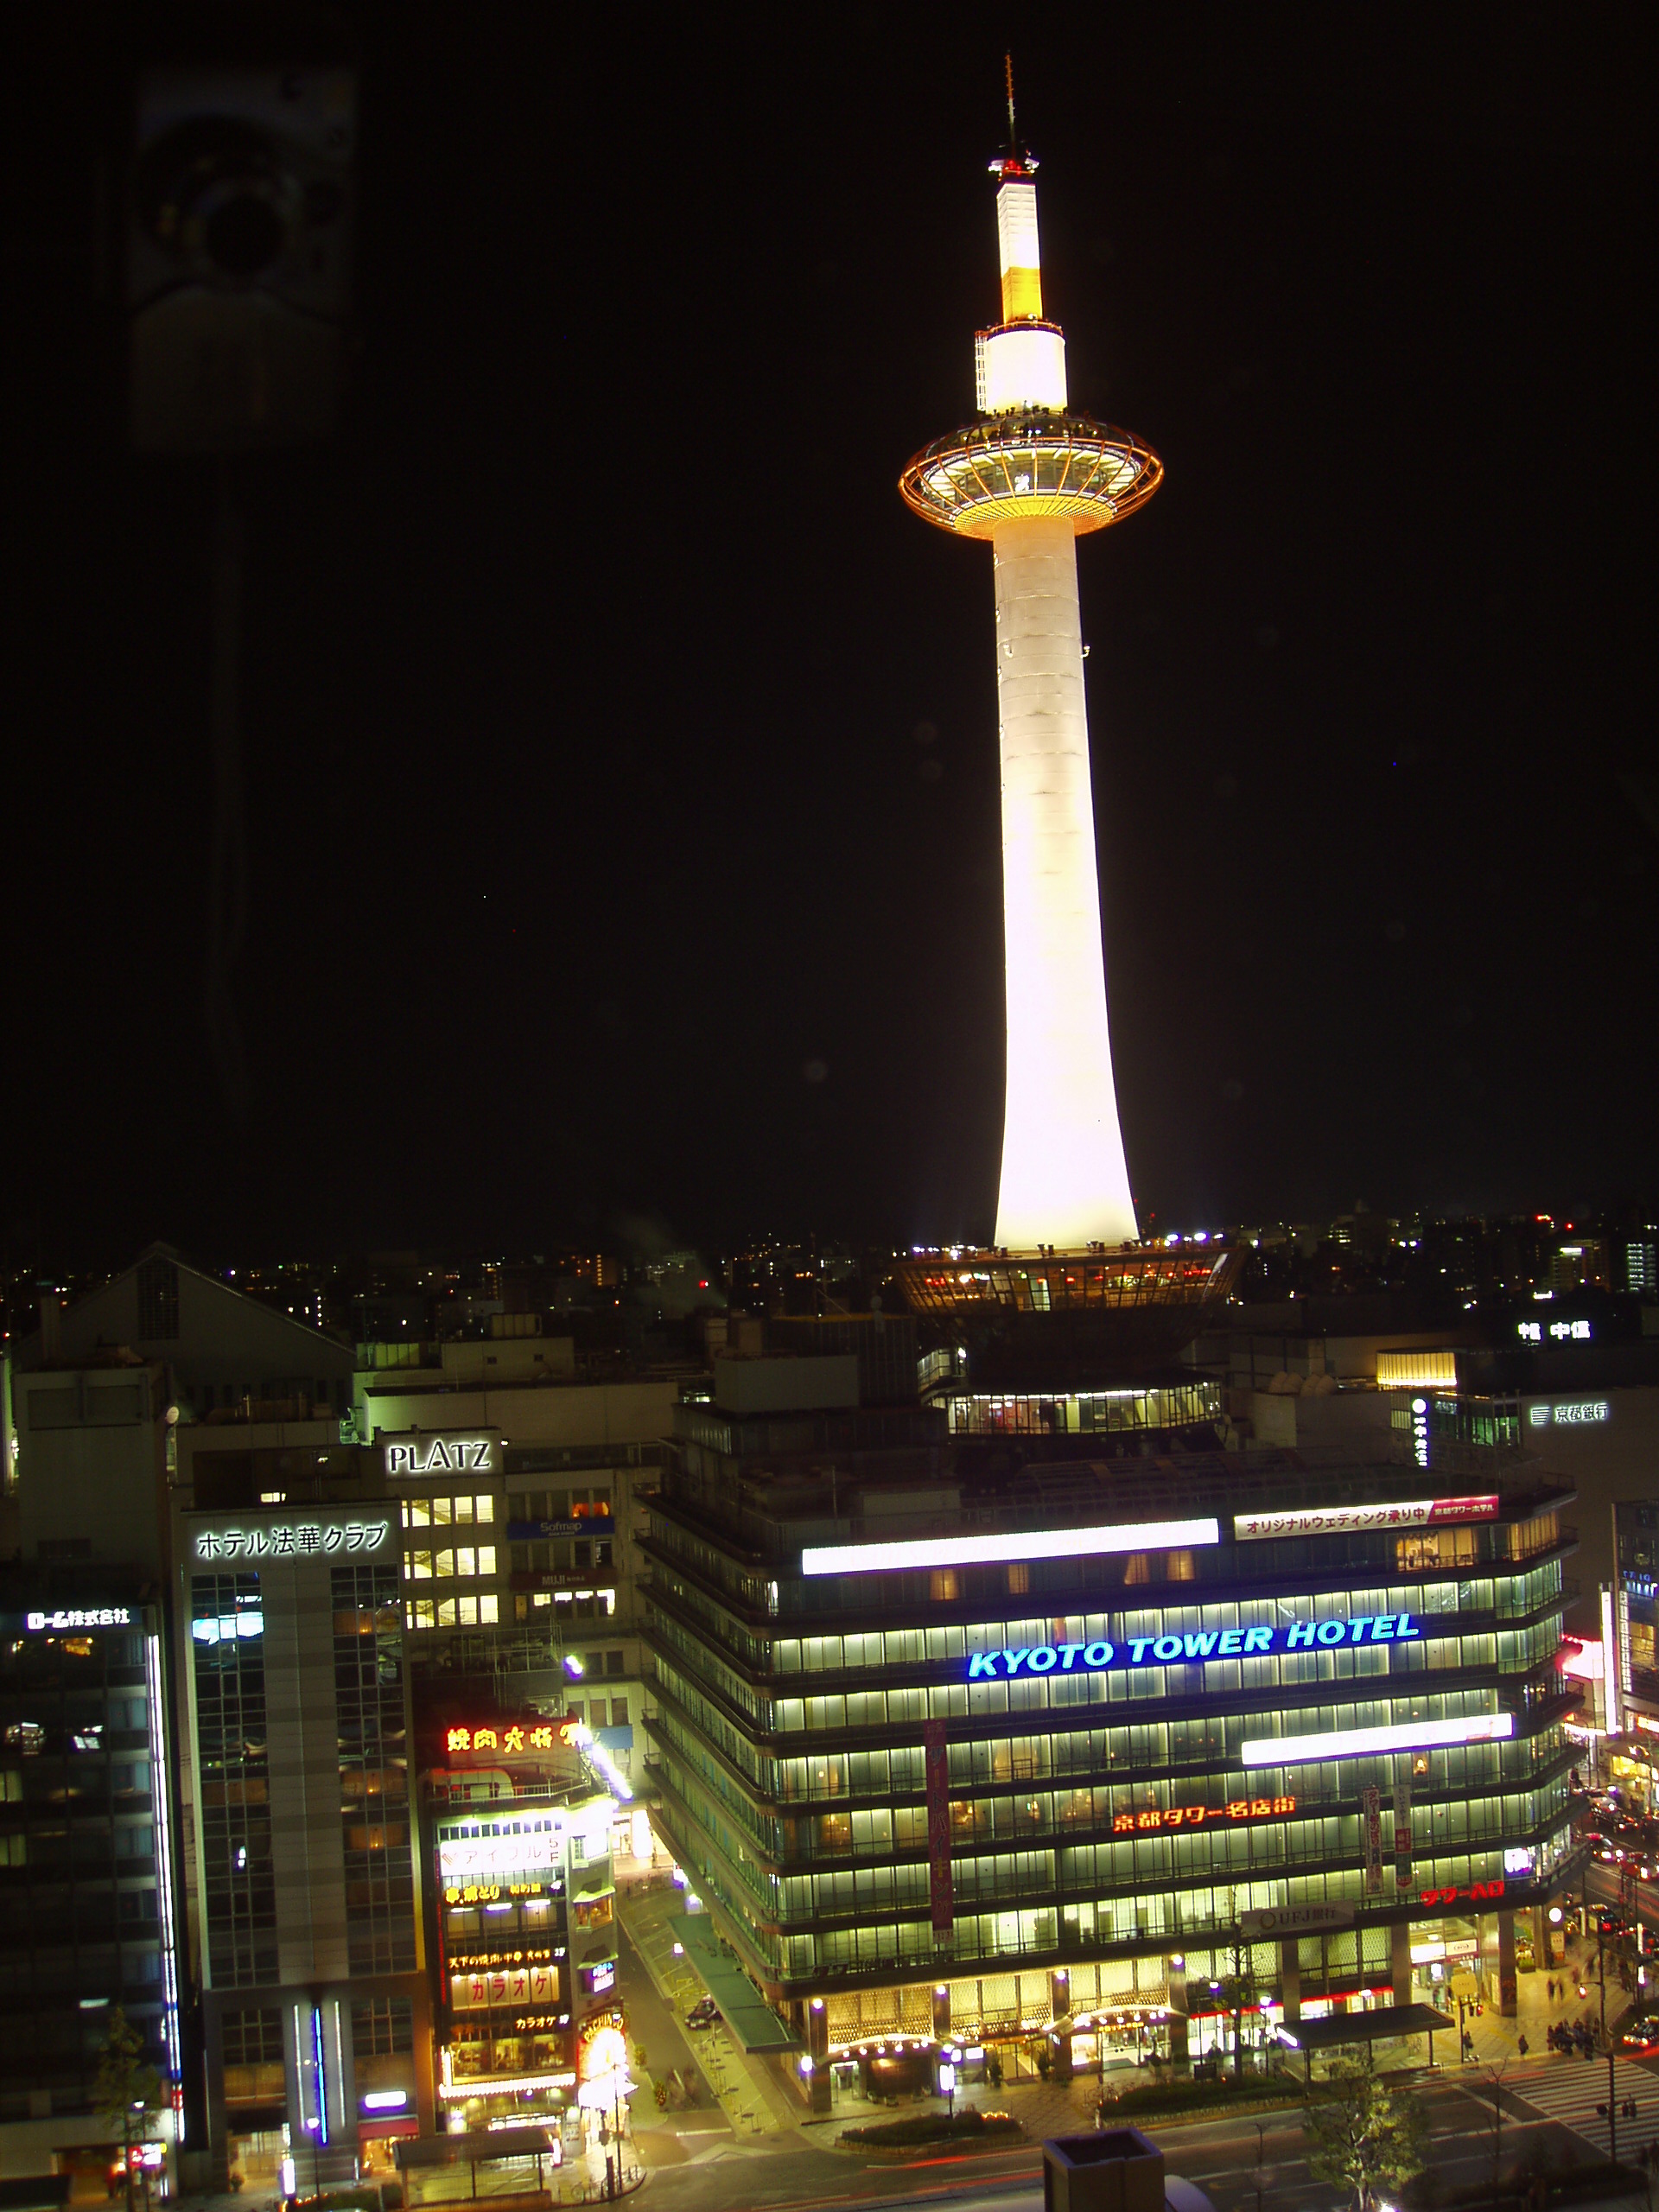 Kyoto Tower sits atop the main train station in Kyoto